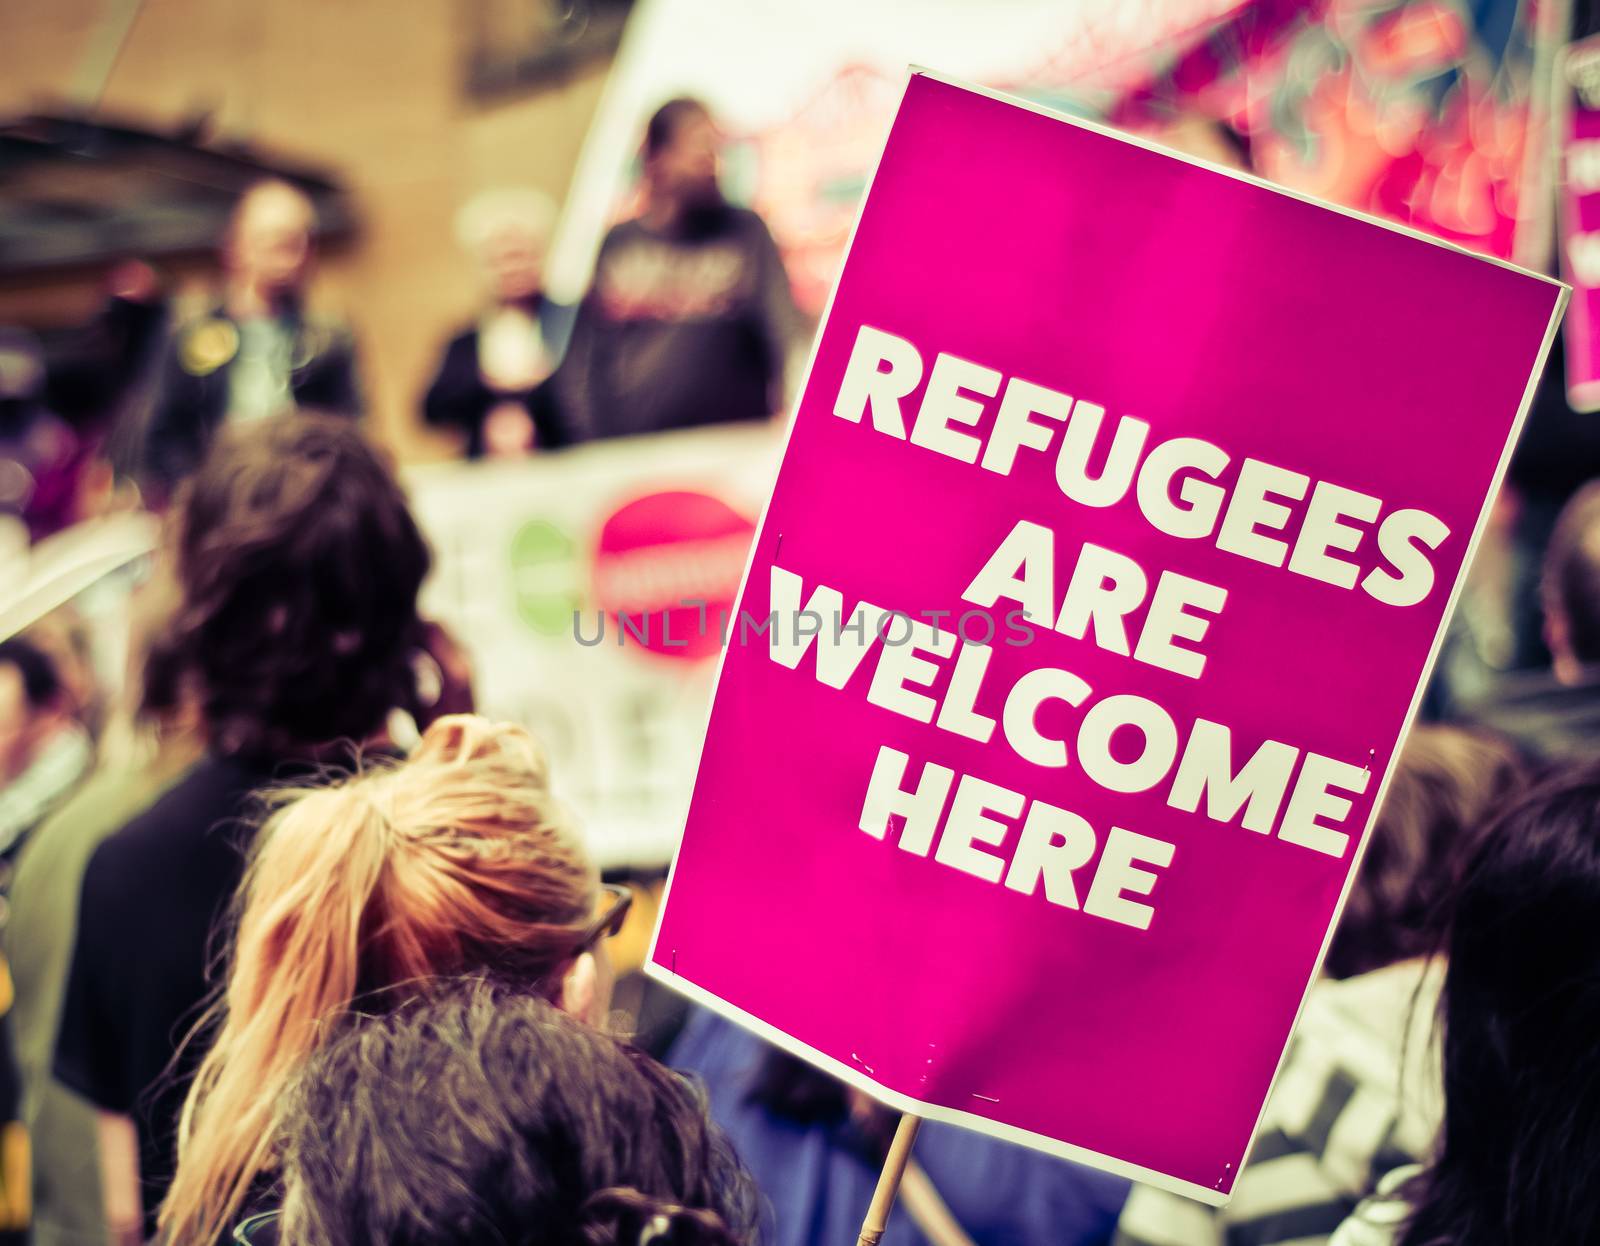 Refugees Are Welcome Street Protestors by mrdoomits